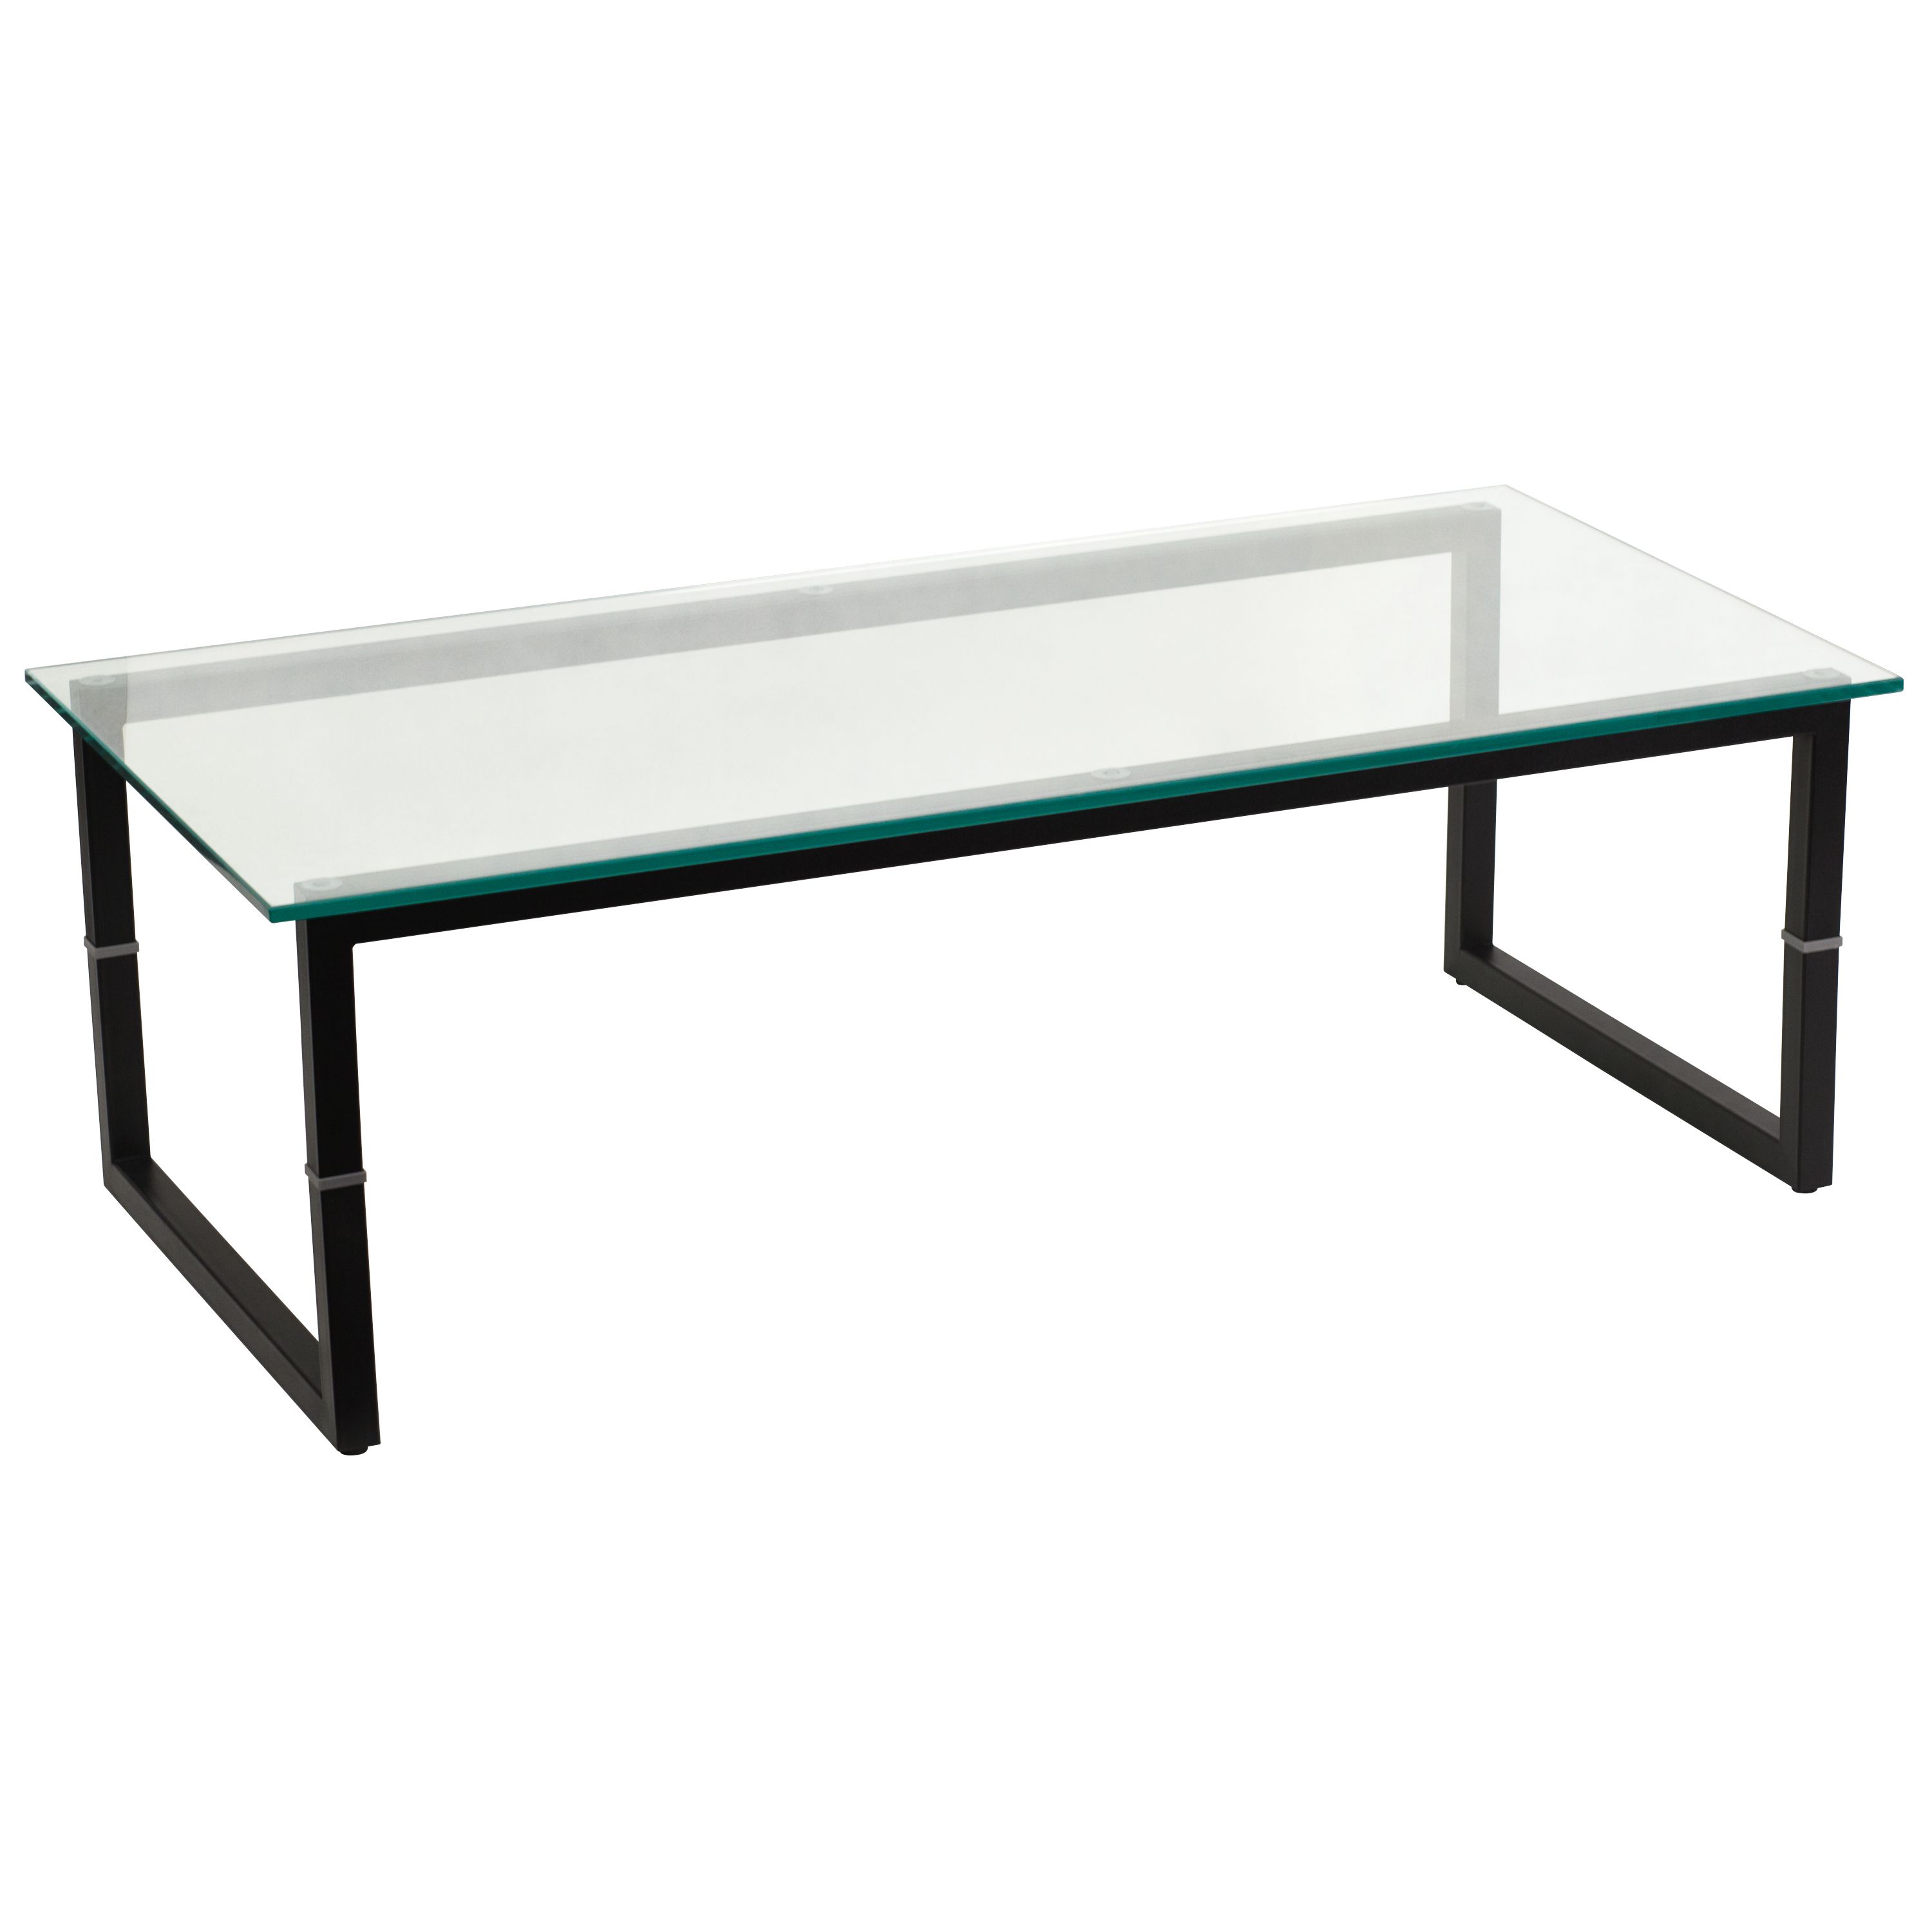 Long Glass Coffee Table An Ultra Modern Clear Angled Glass Media Side Table Which As Well As Looking A Fantastic Piece Of Glass Furniture On Its Own (View 1 of 10)